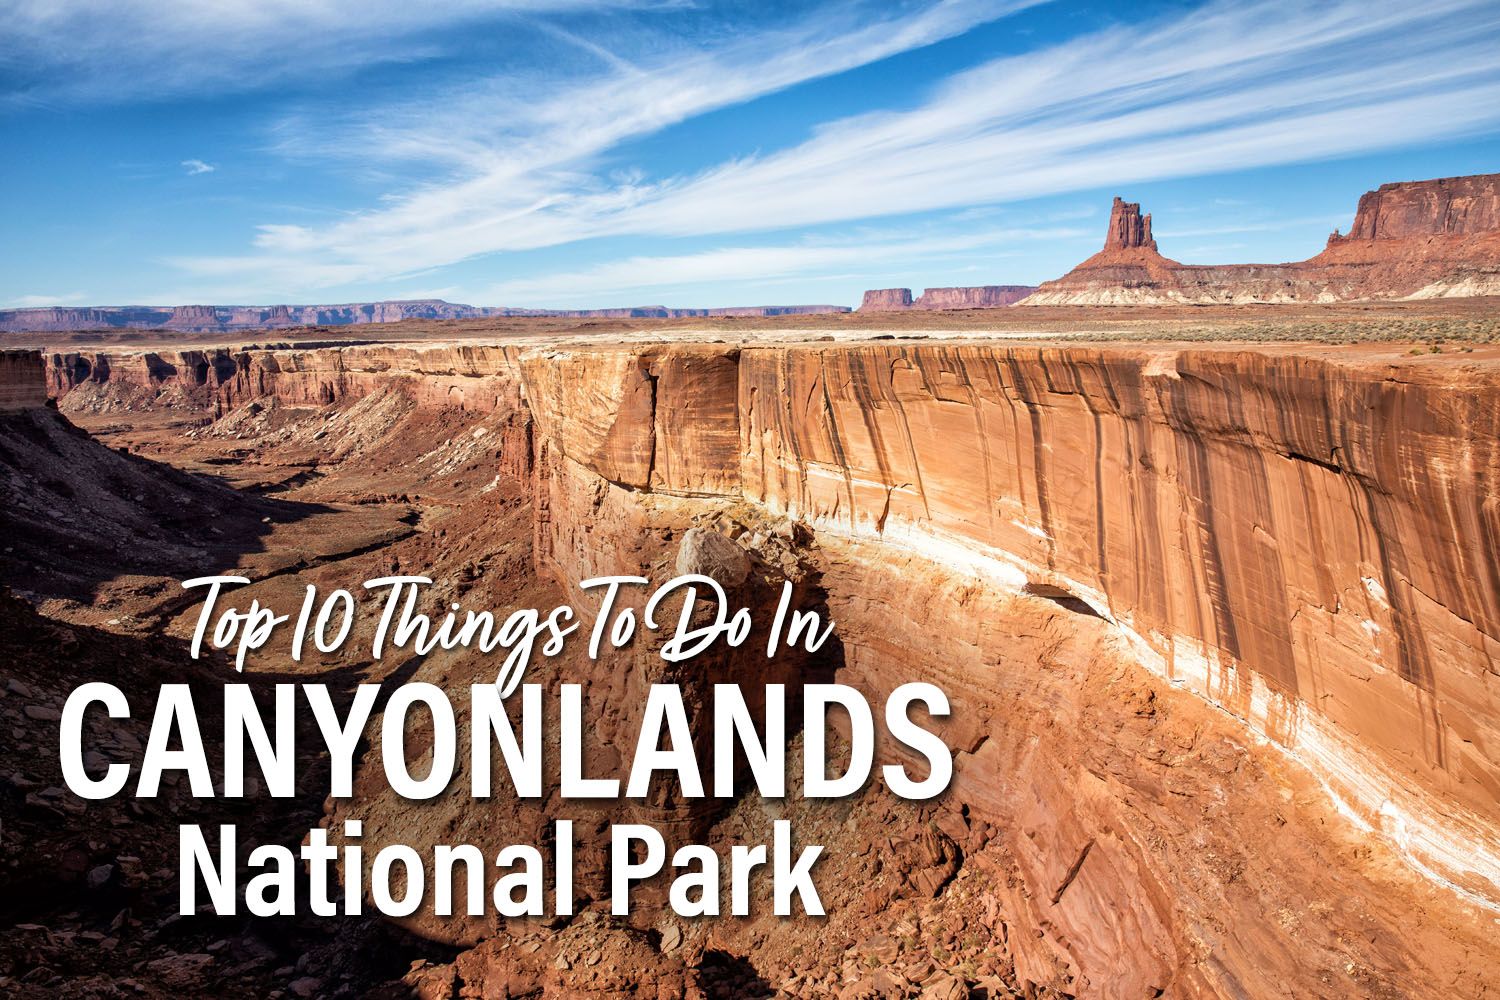 Canyonlands National Park To Do List